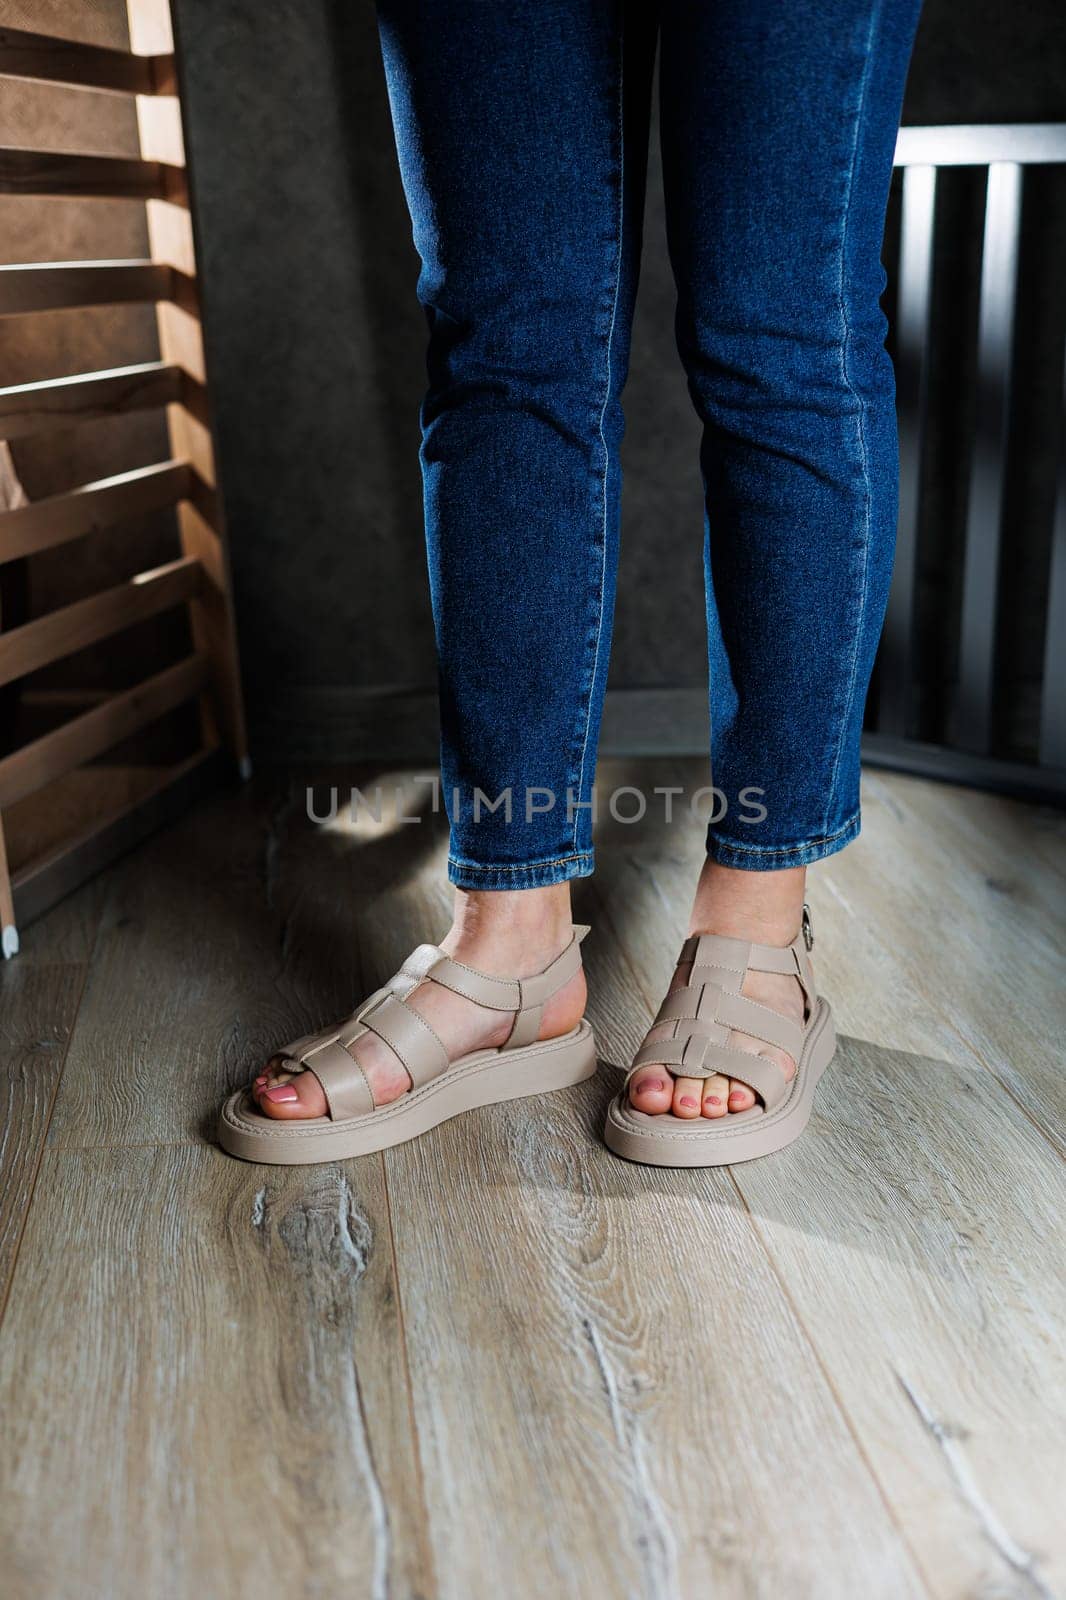 Summer women's sandals. Collection of women's leather summer sandals. Slender female legs in beige leather sandals without heels. by Dmitrytph